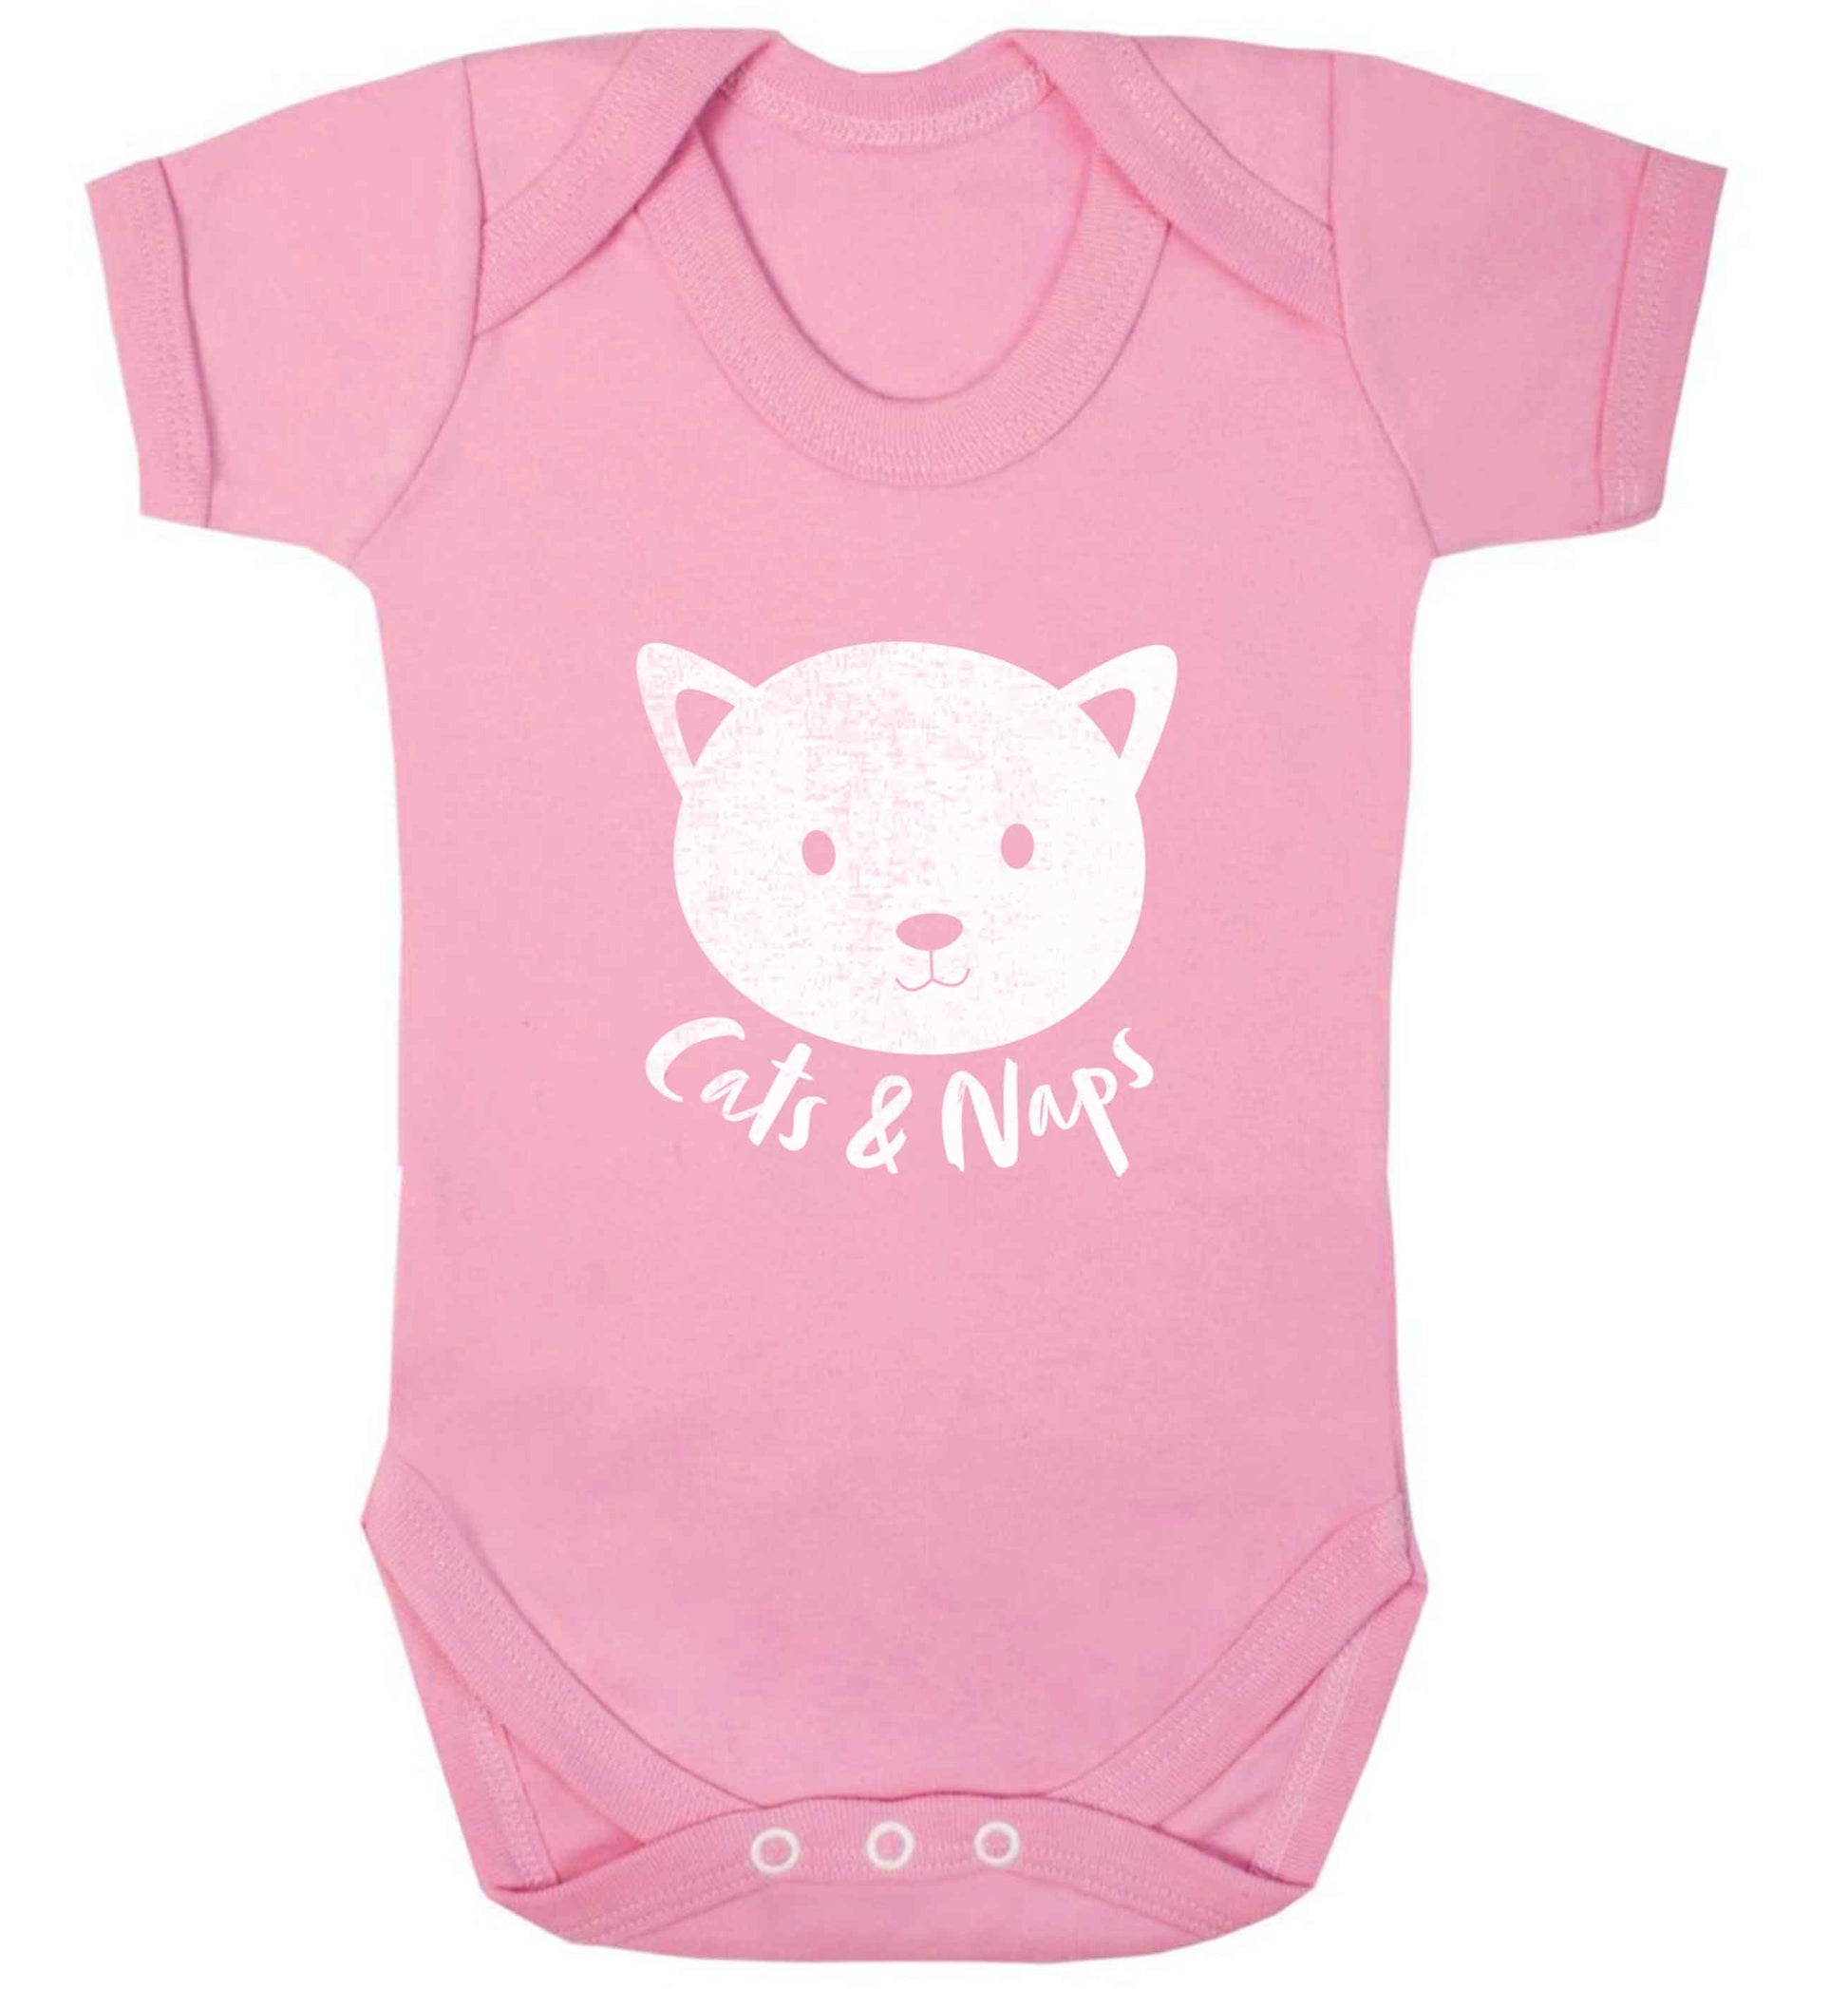 Cats and naps Kit baby vest pale pink 18-24 months